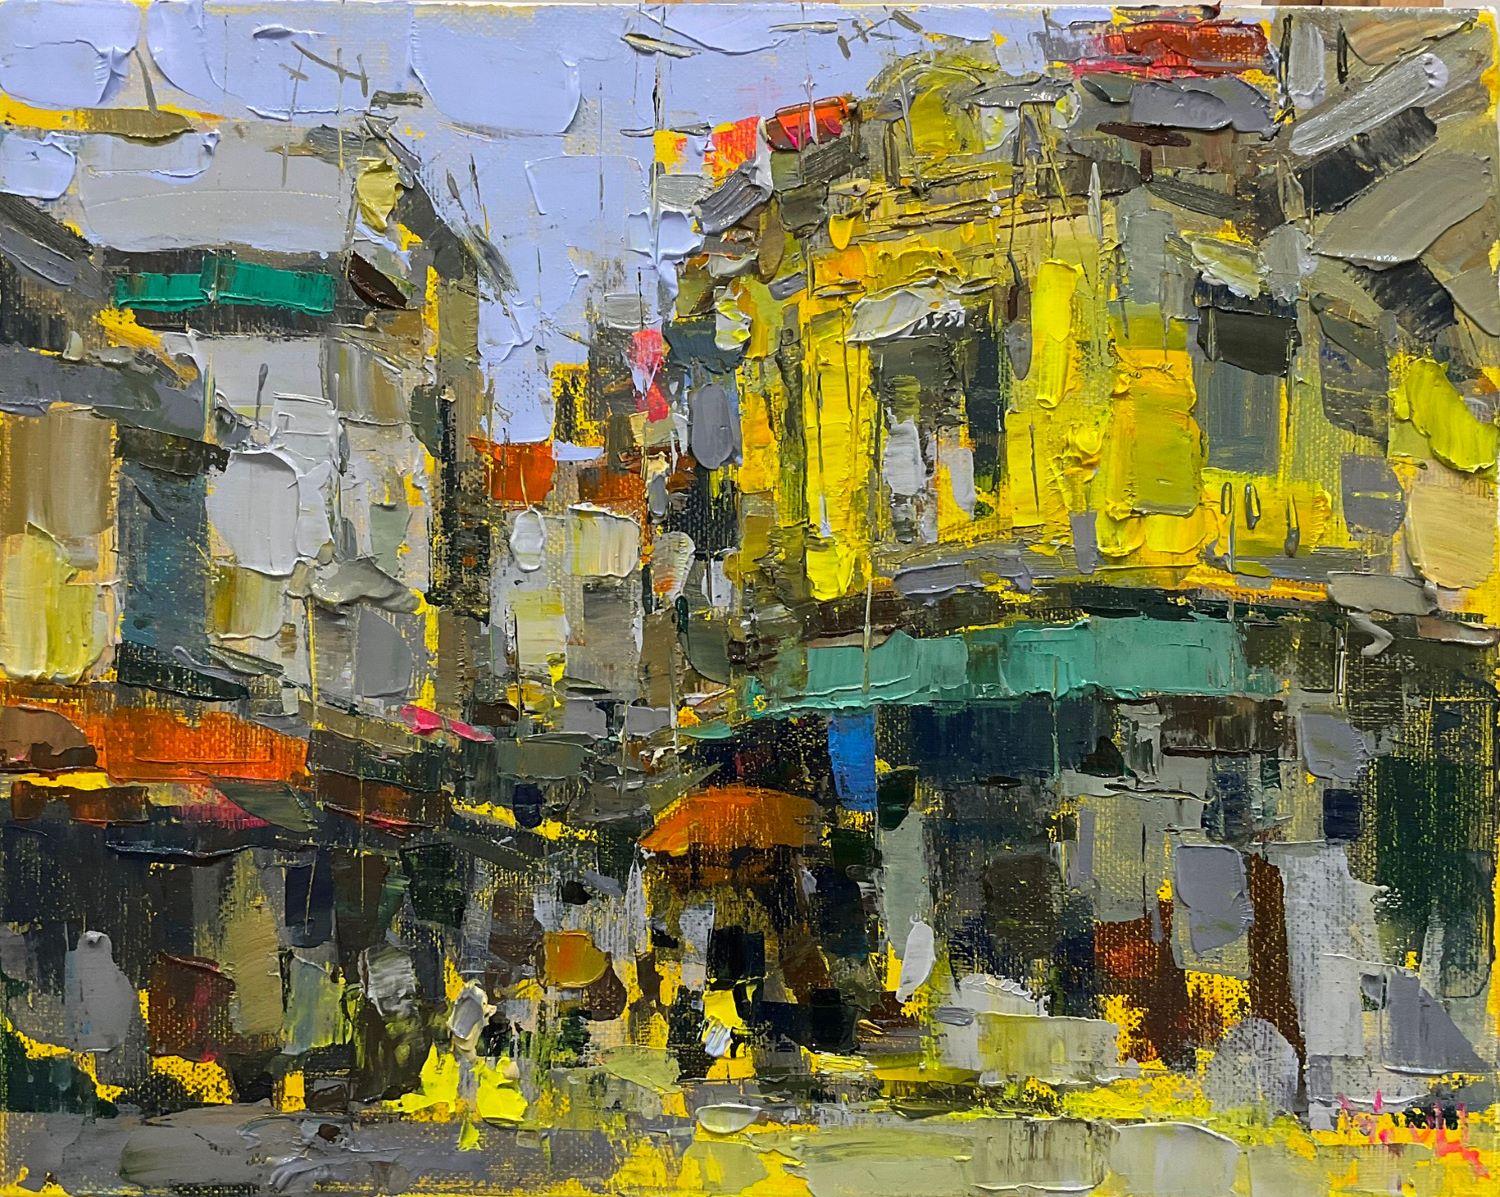 Small Street IV - Vietnamese Oil Painting by Artist Pham Hoang Minh